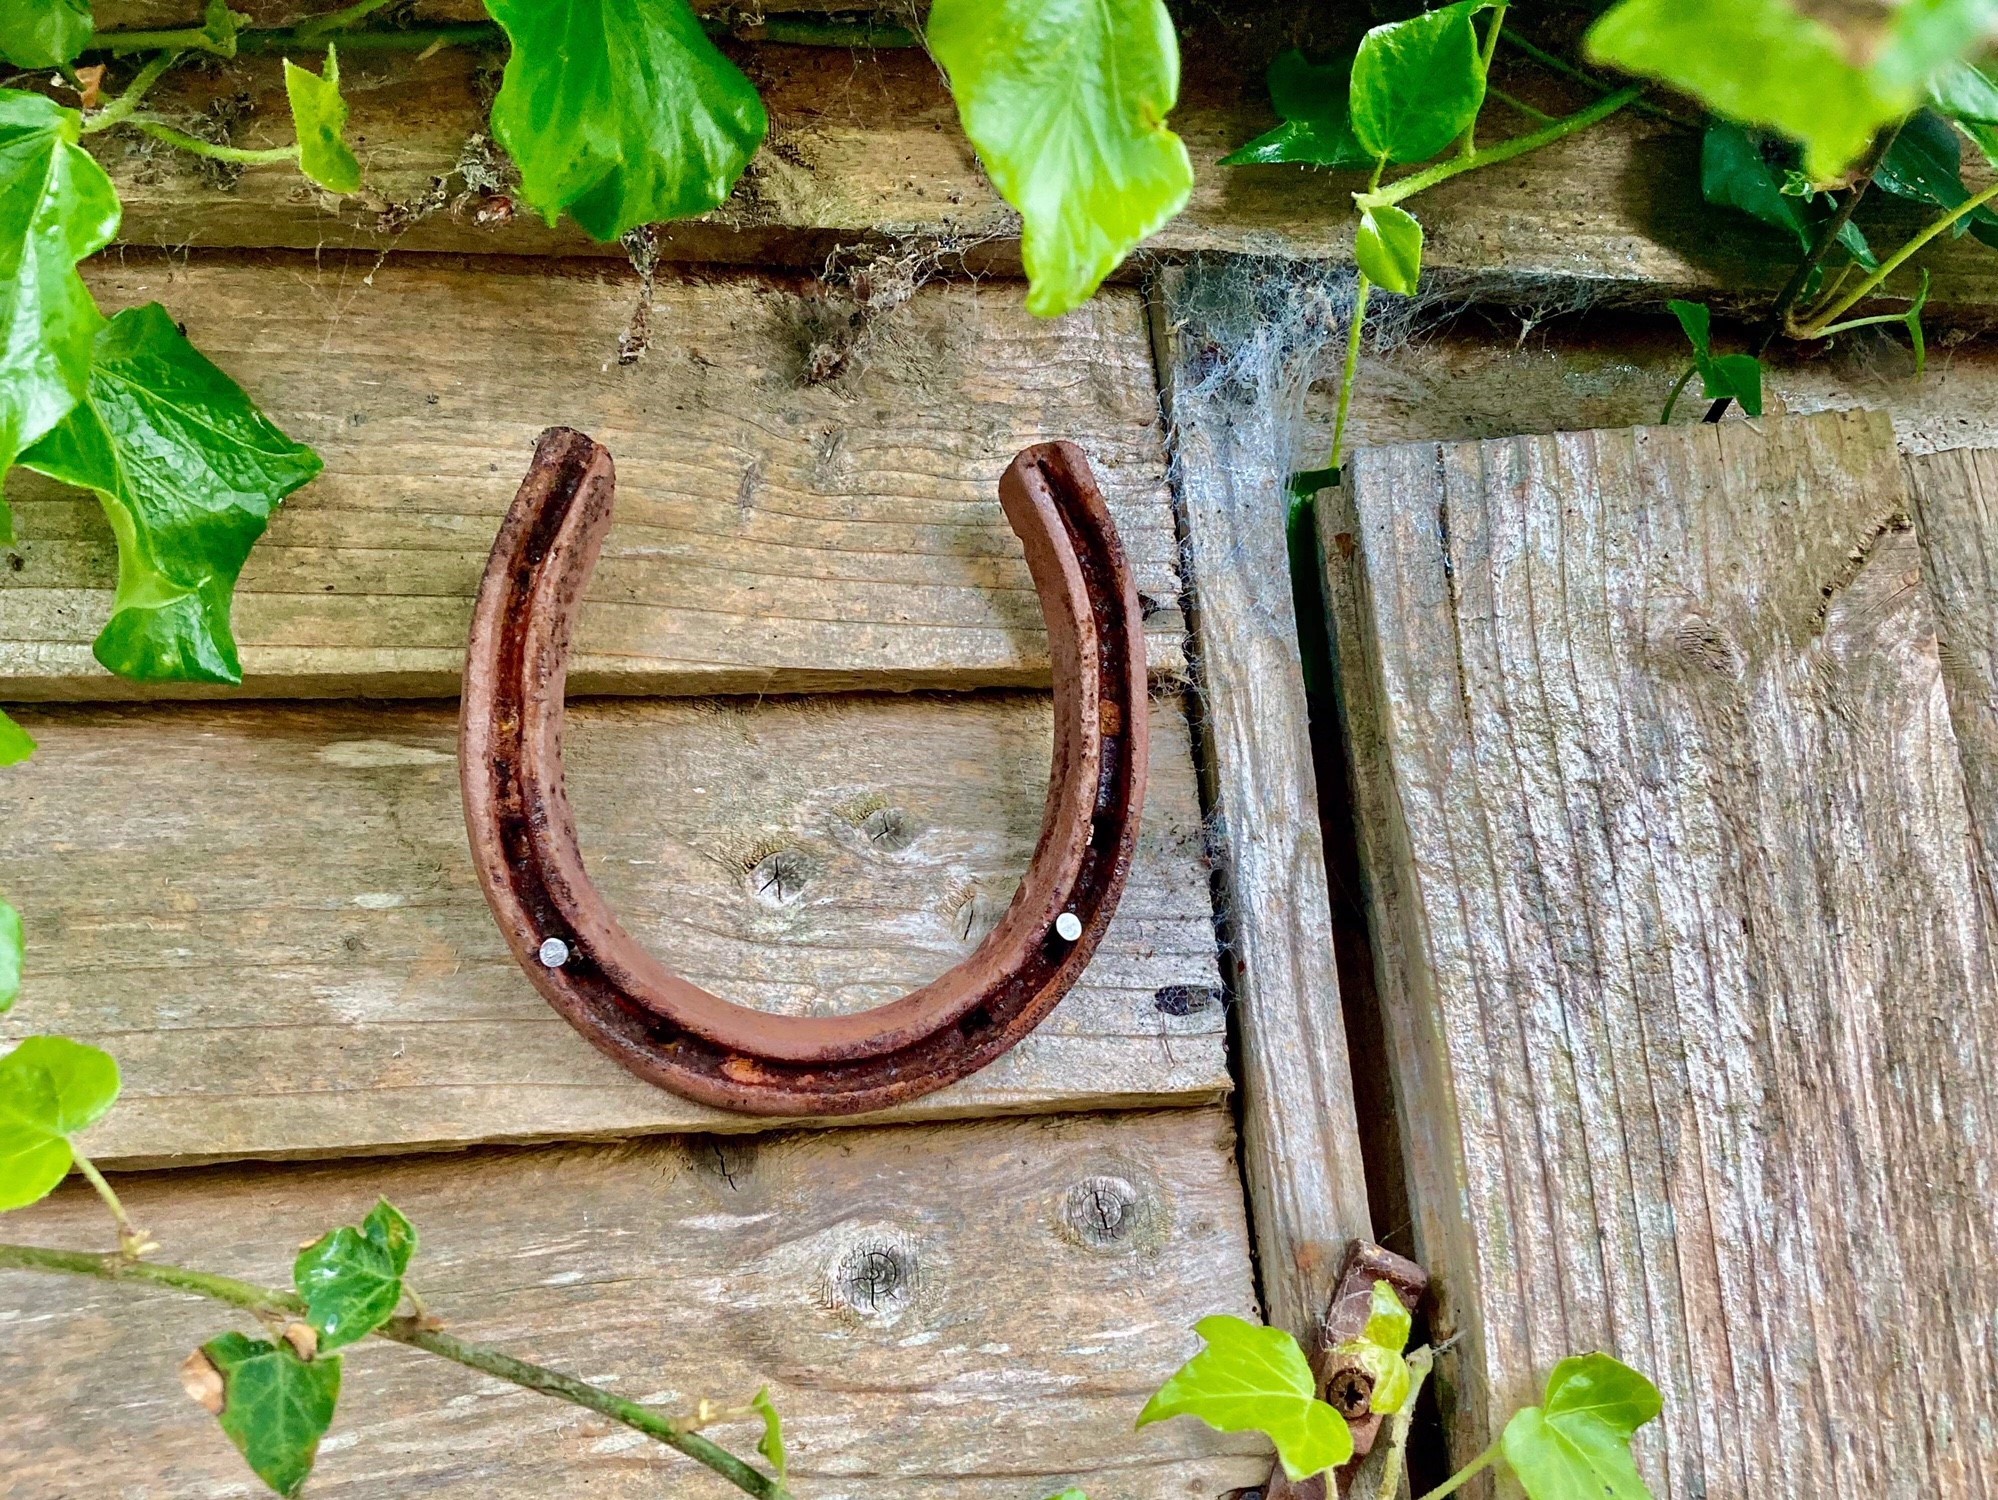 Is it bad luck to paint a horseshoe?